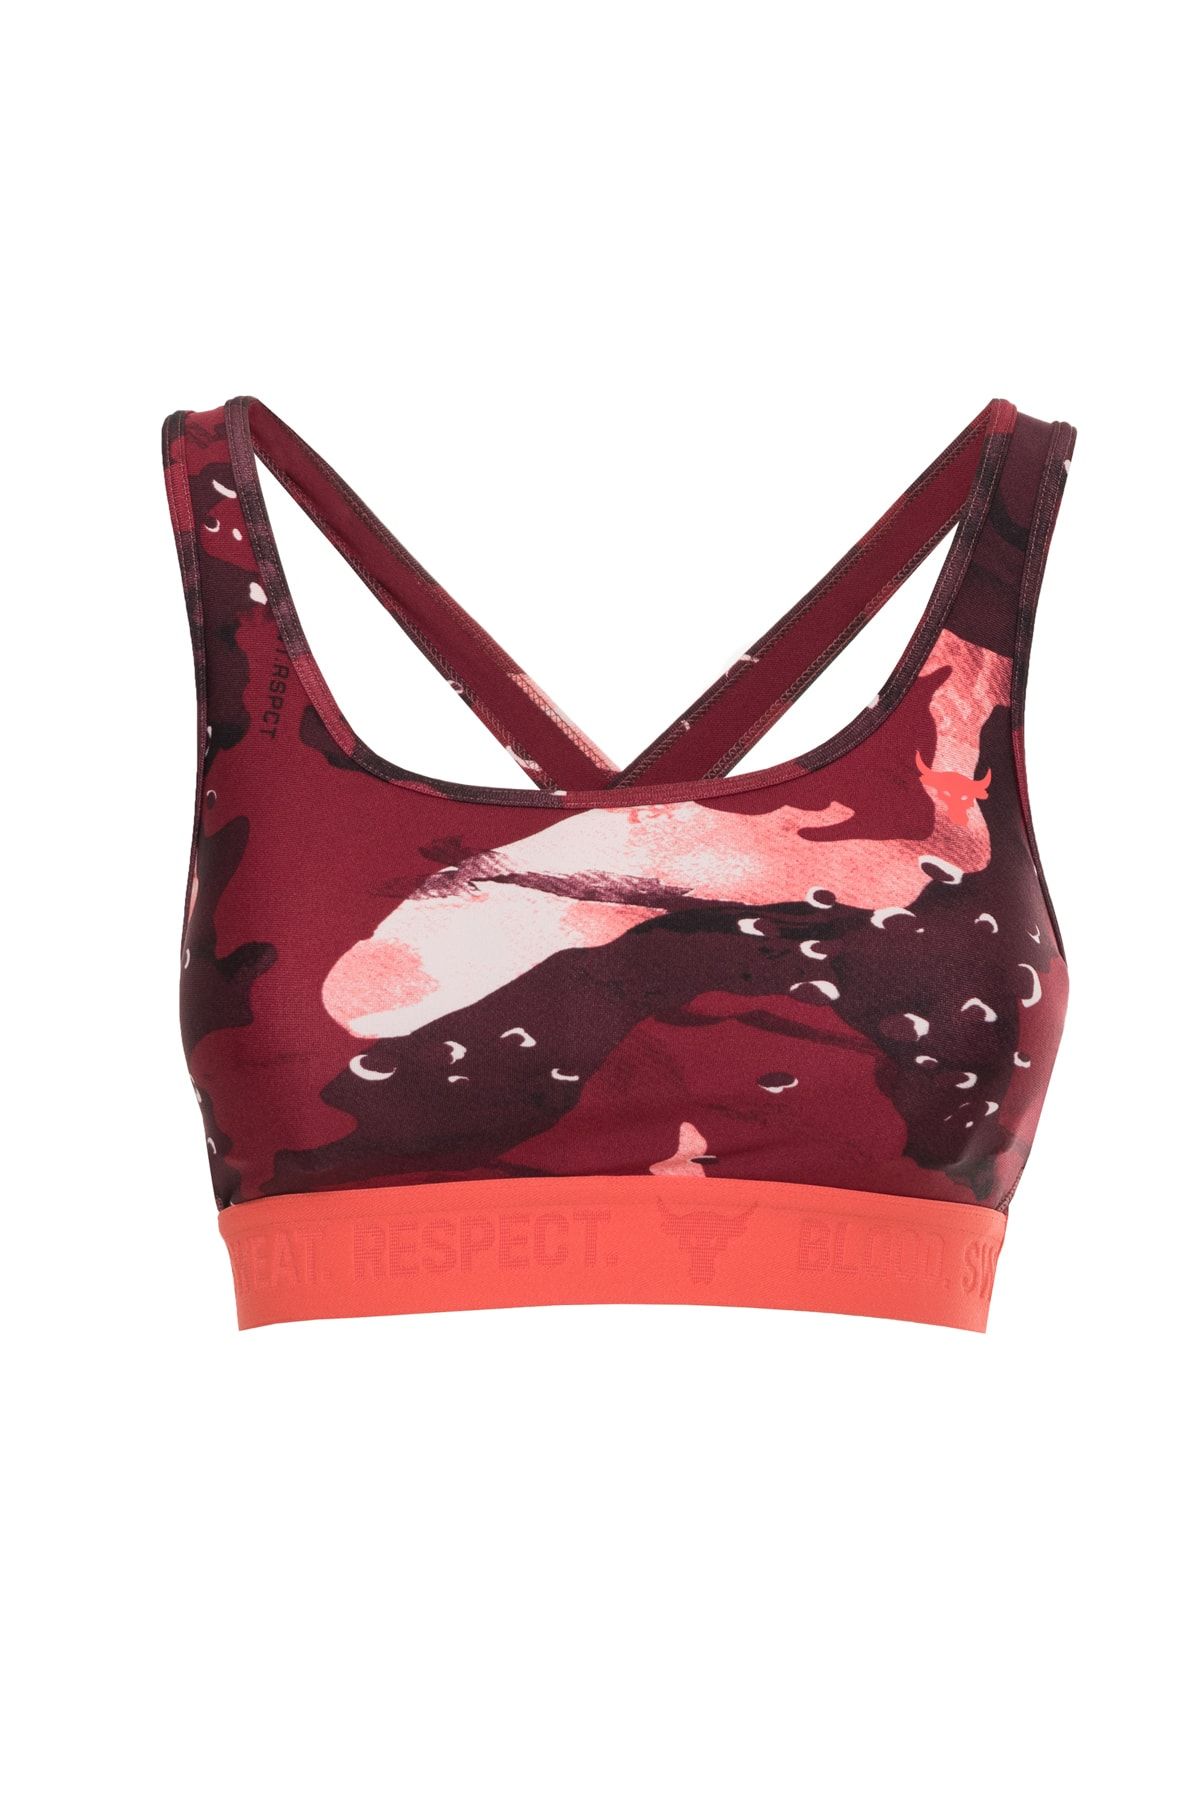 Under Armour Women's Project Rock Printed Sports Bra